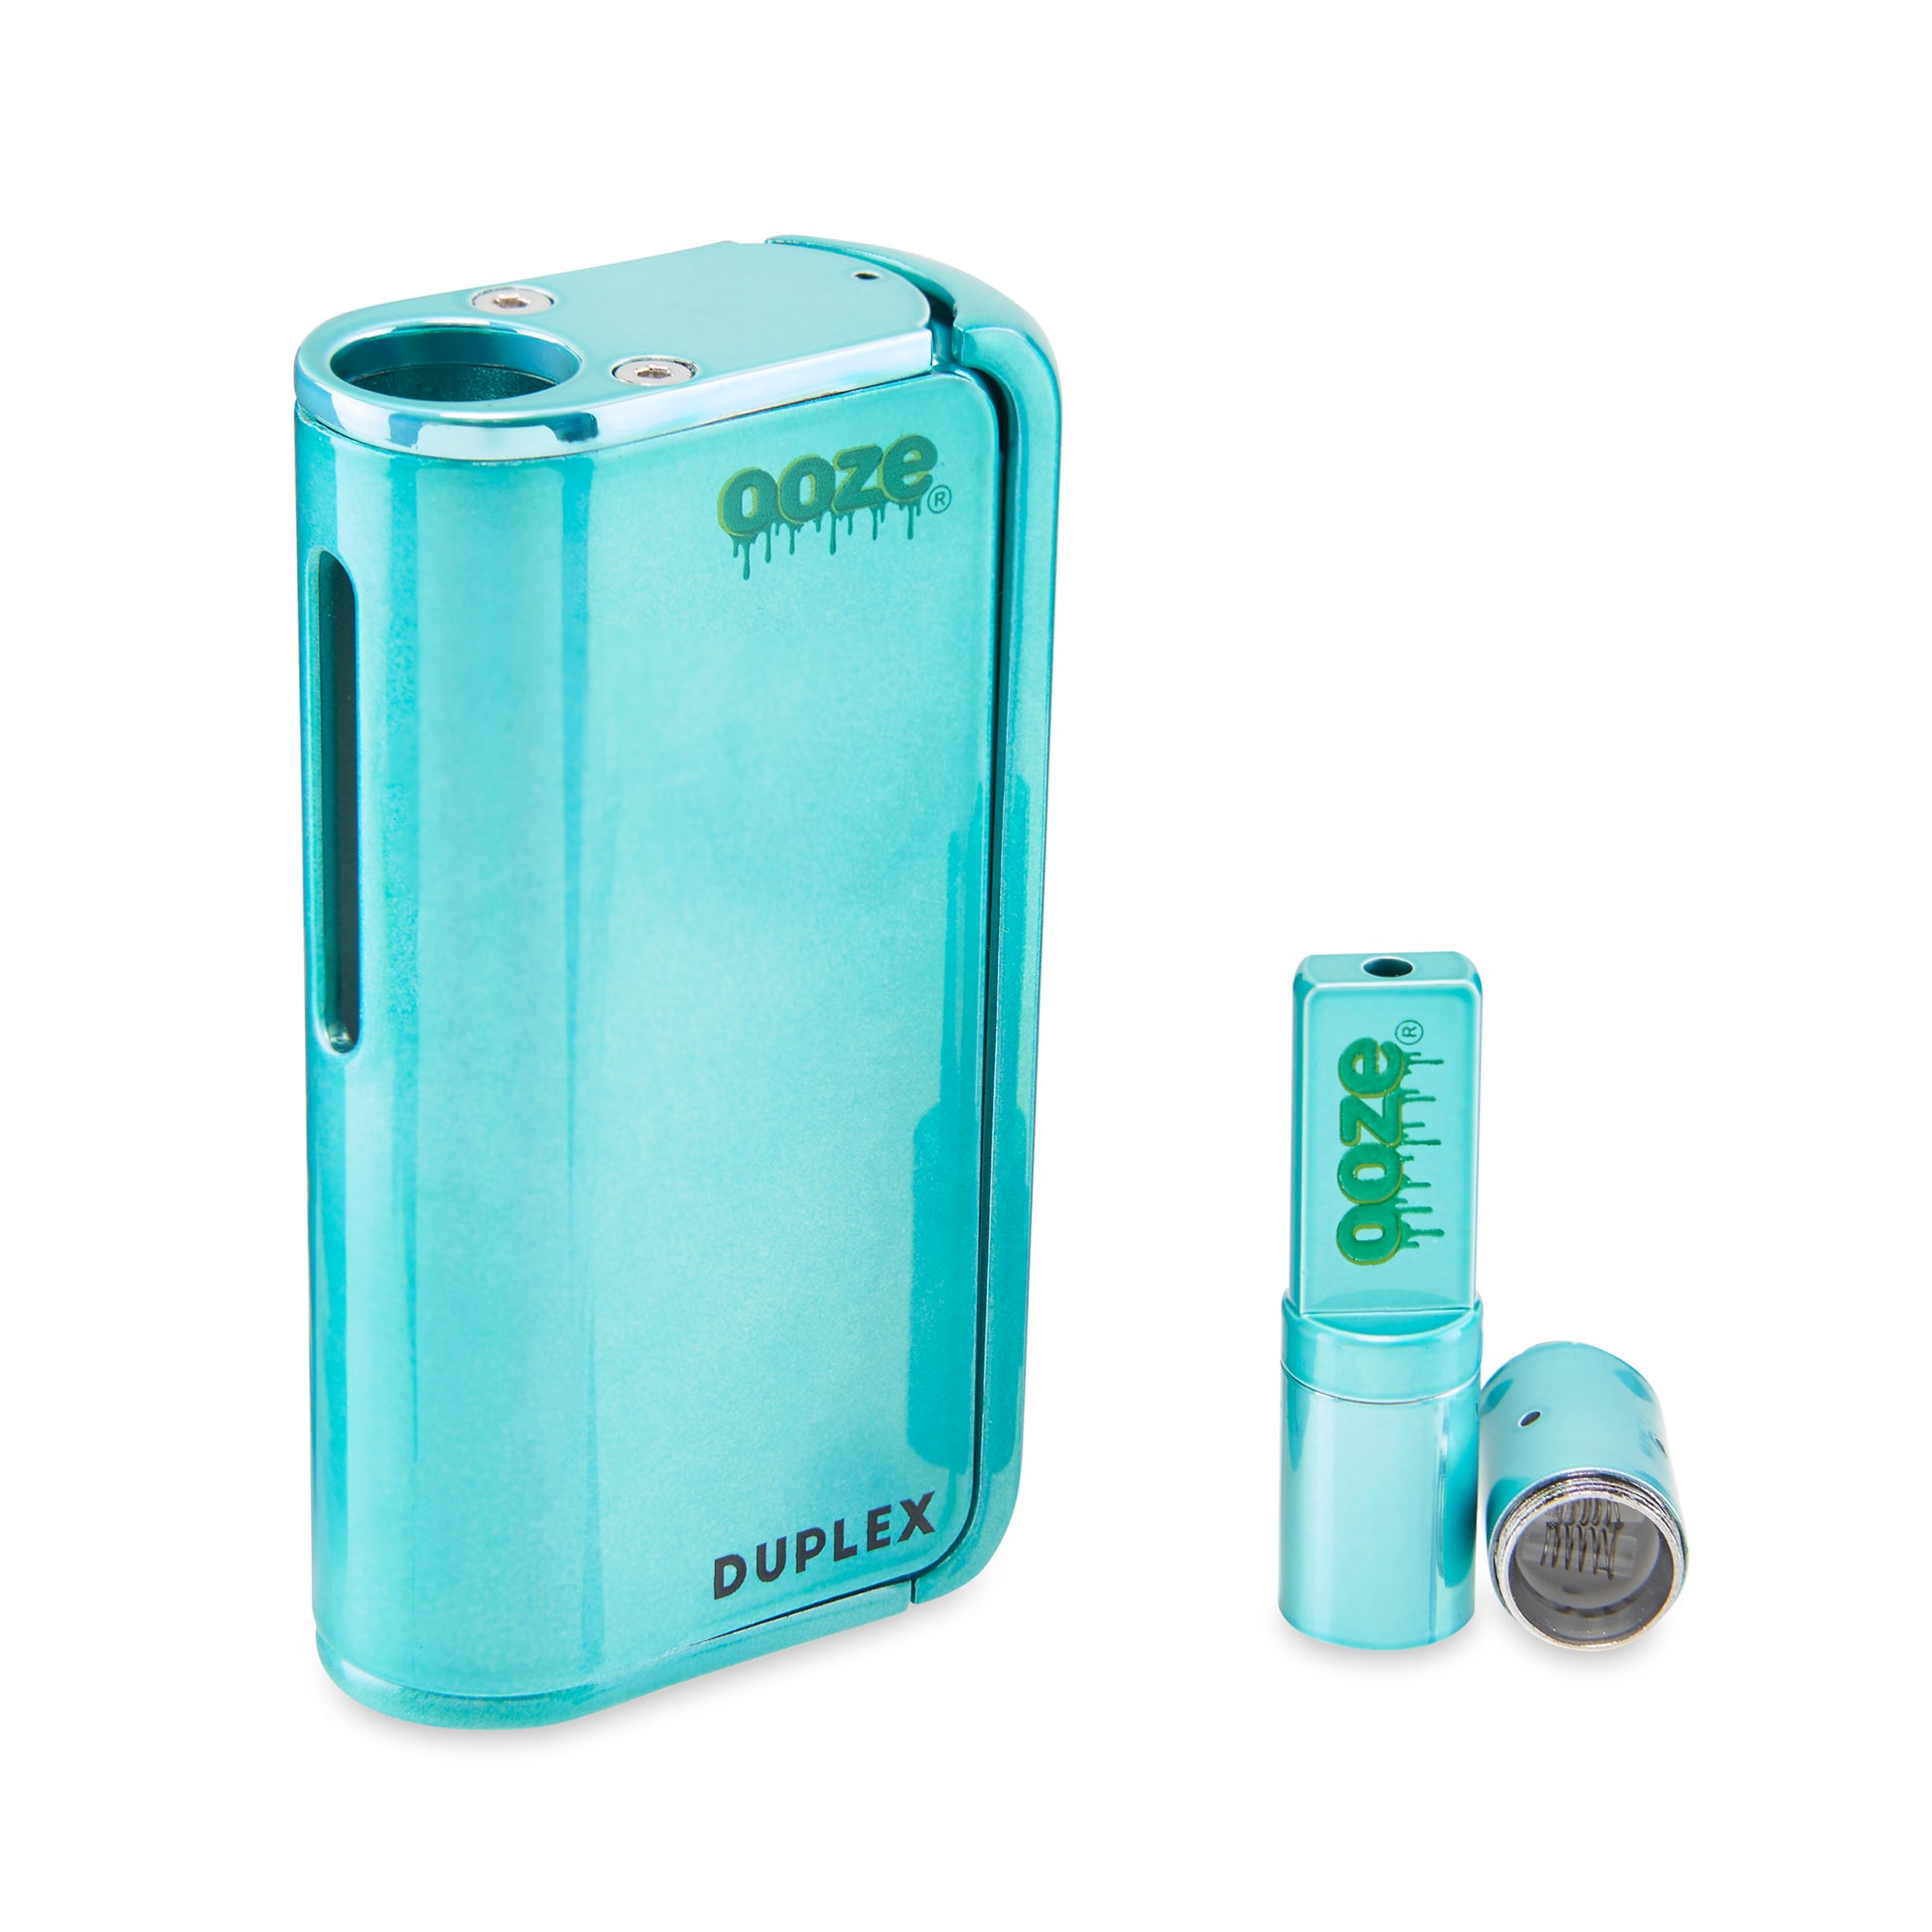 The Arctic Blue Ooze Duplex Pro Vaporizer is shown on an angle with the wax atomizer to the right, disassembled to show the dual quartz coil.